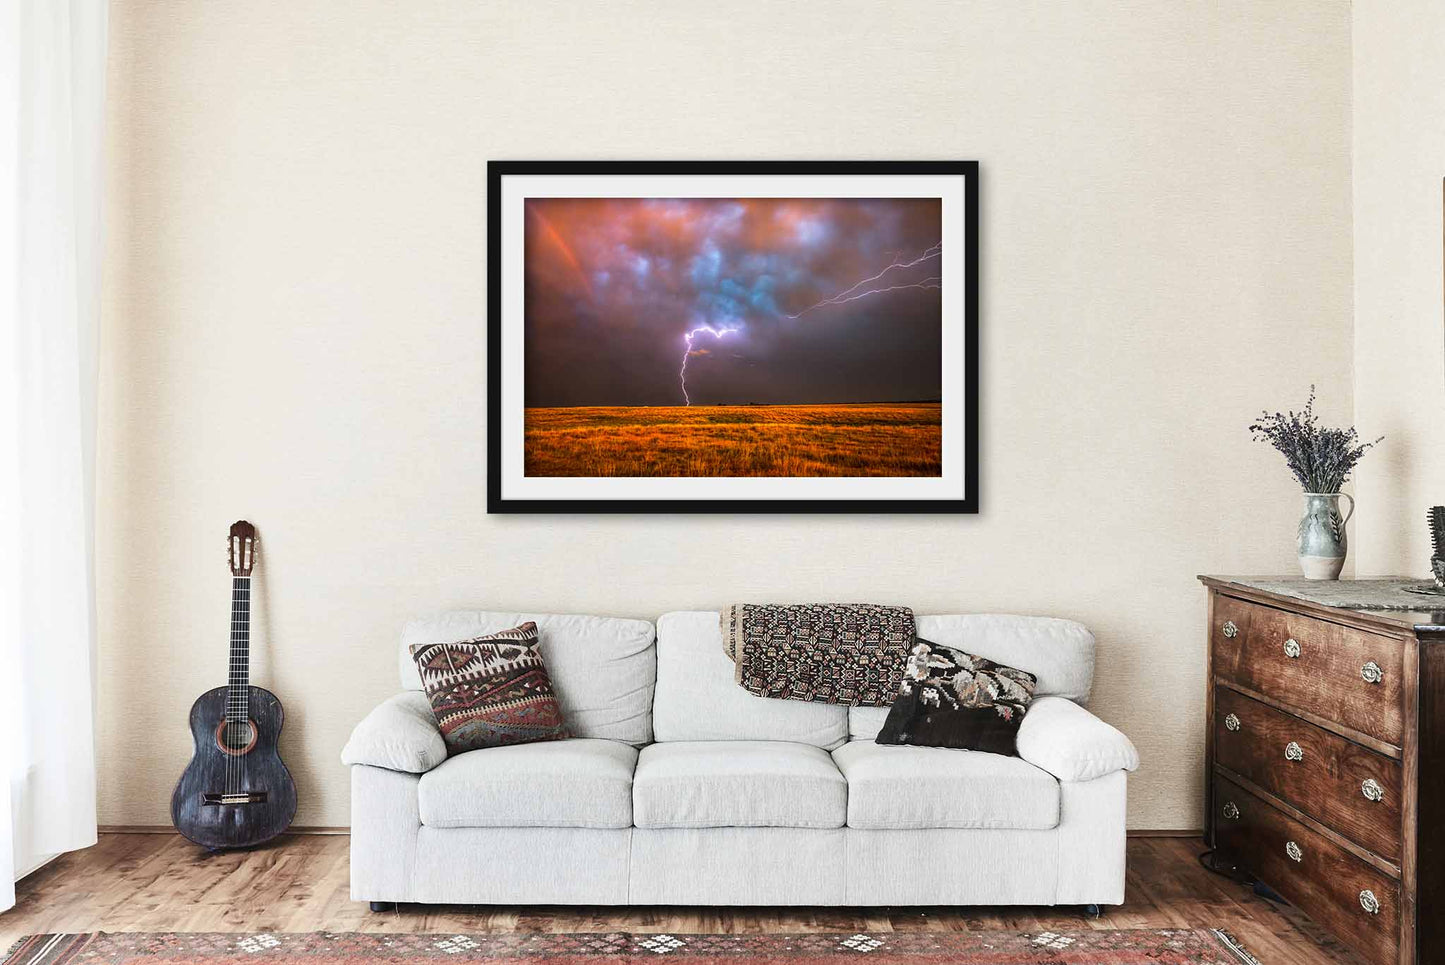 Framed Storm Print (Ready to Hang) Picture of Lightning Spanning Sky at Sunset Over Prairie in Oklahoma Thunderstorm Wall Art Nature Decor